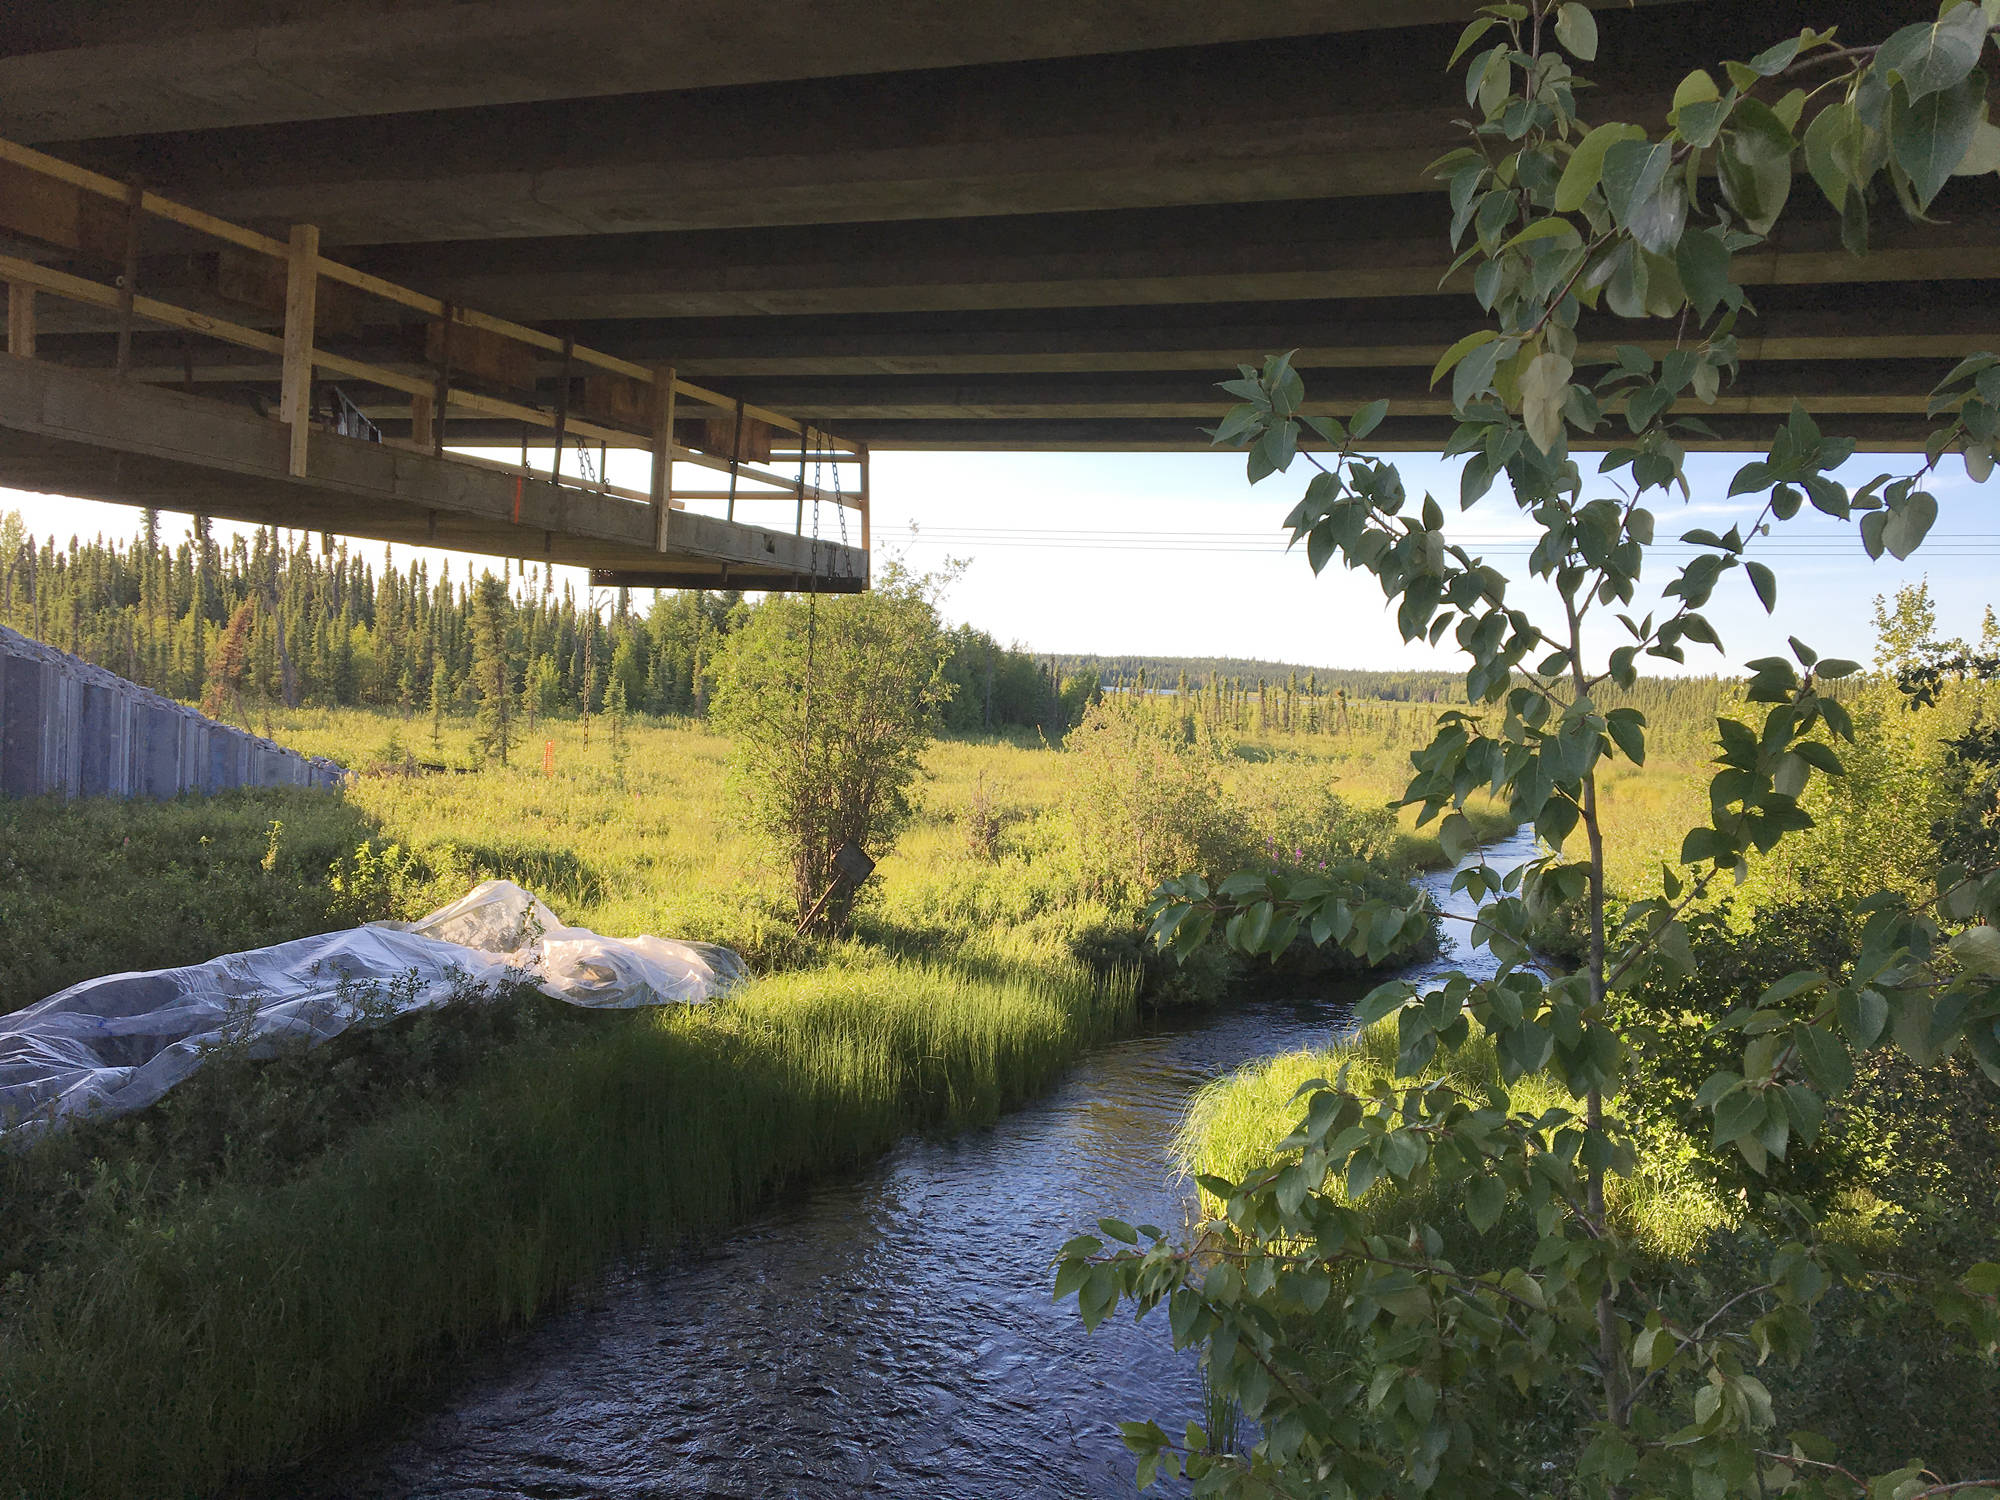 A new bridge over the East Fork of the Moose River will provide a very natural wildlife underpass after the existing small culvert and roadbed are removed (Photo provided by John Morton)